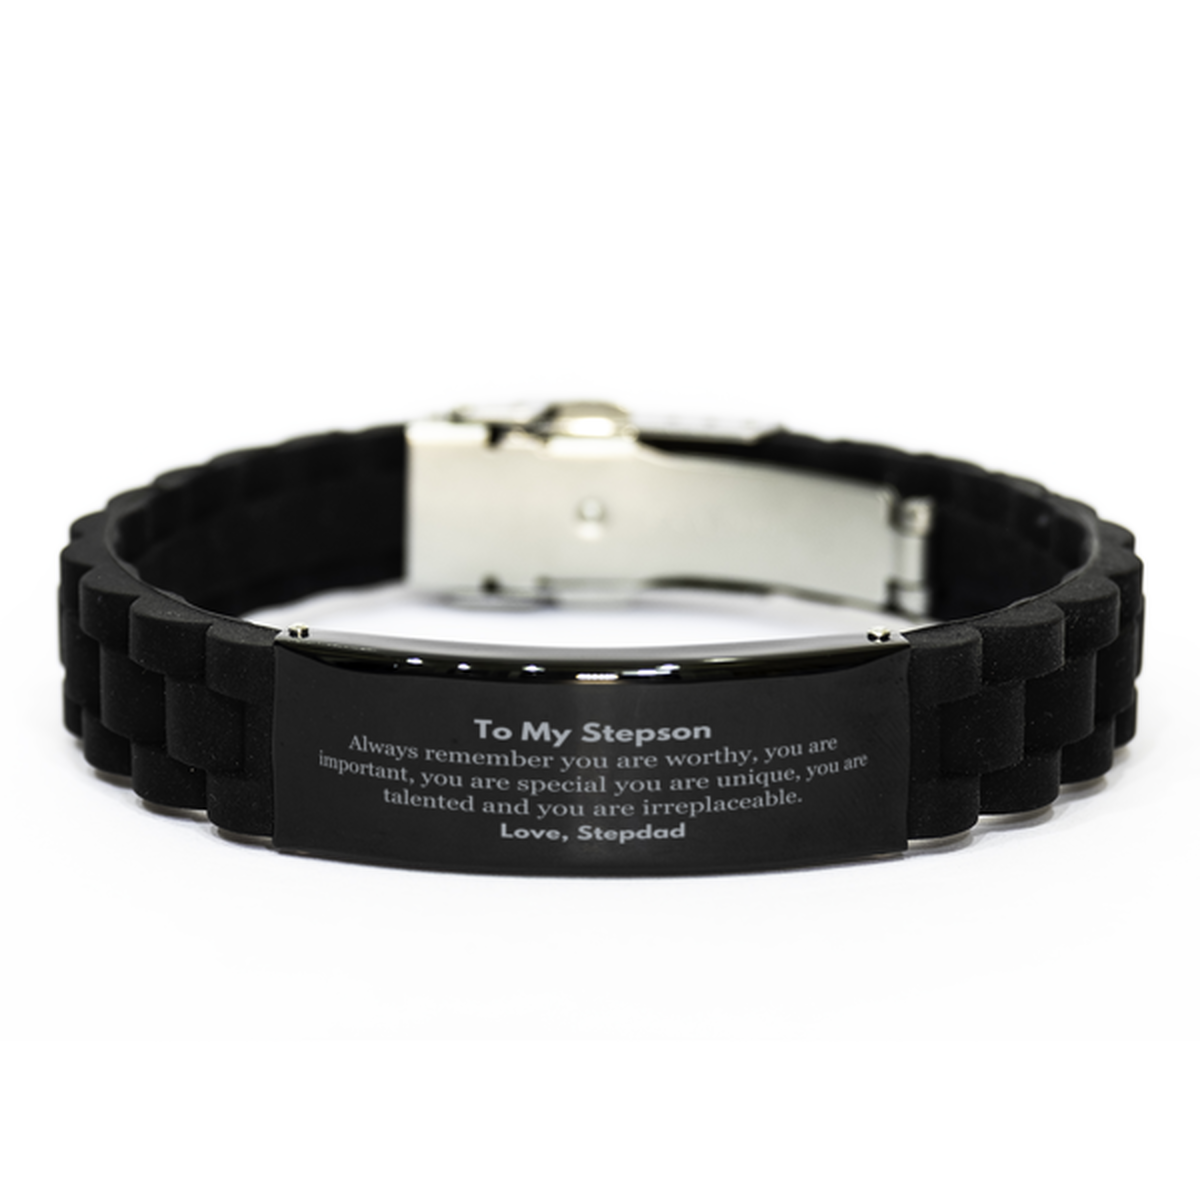 Stepson Birthday Gifts from Stepdad, Inspirational Black Glidelock Clasp Bracelet for Stepson Christmas Graduation Gifts for Stepson Always remember you are worthy, you are important. Love, Stepdad